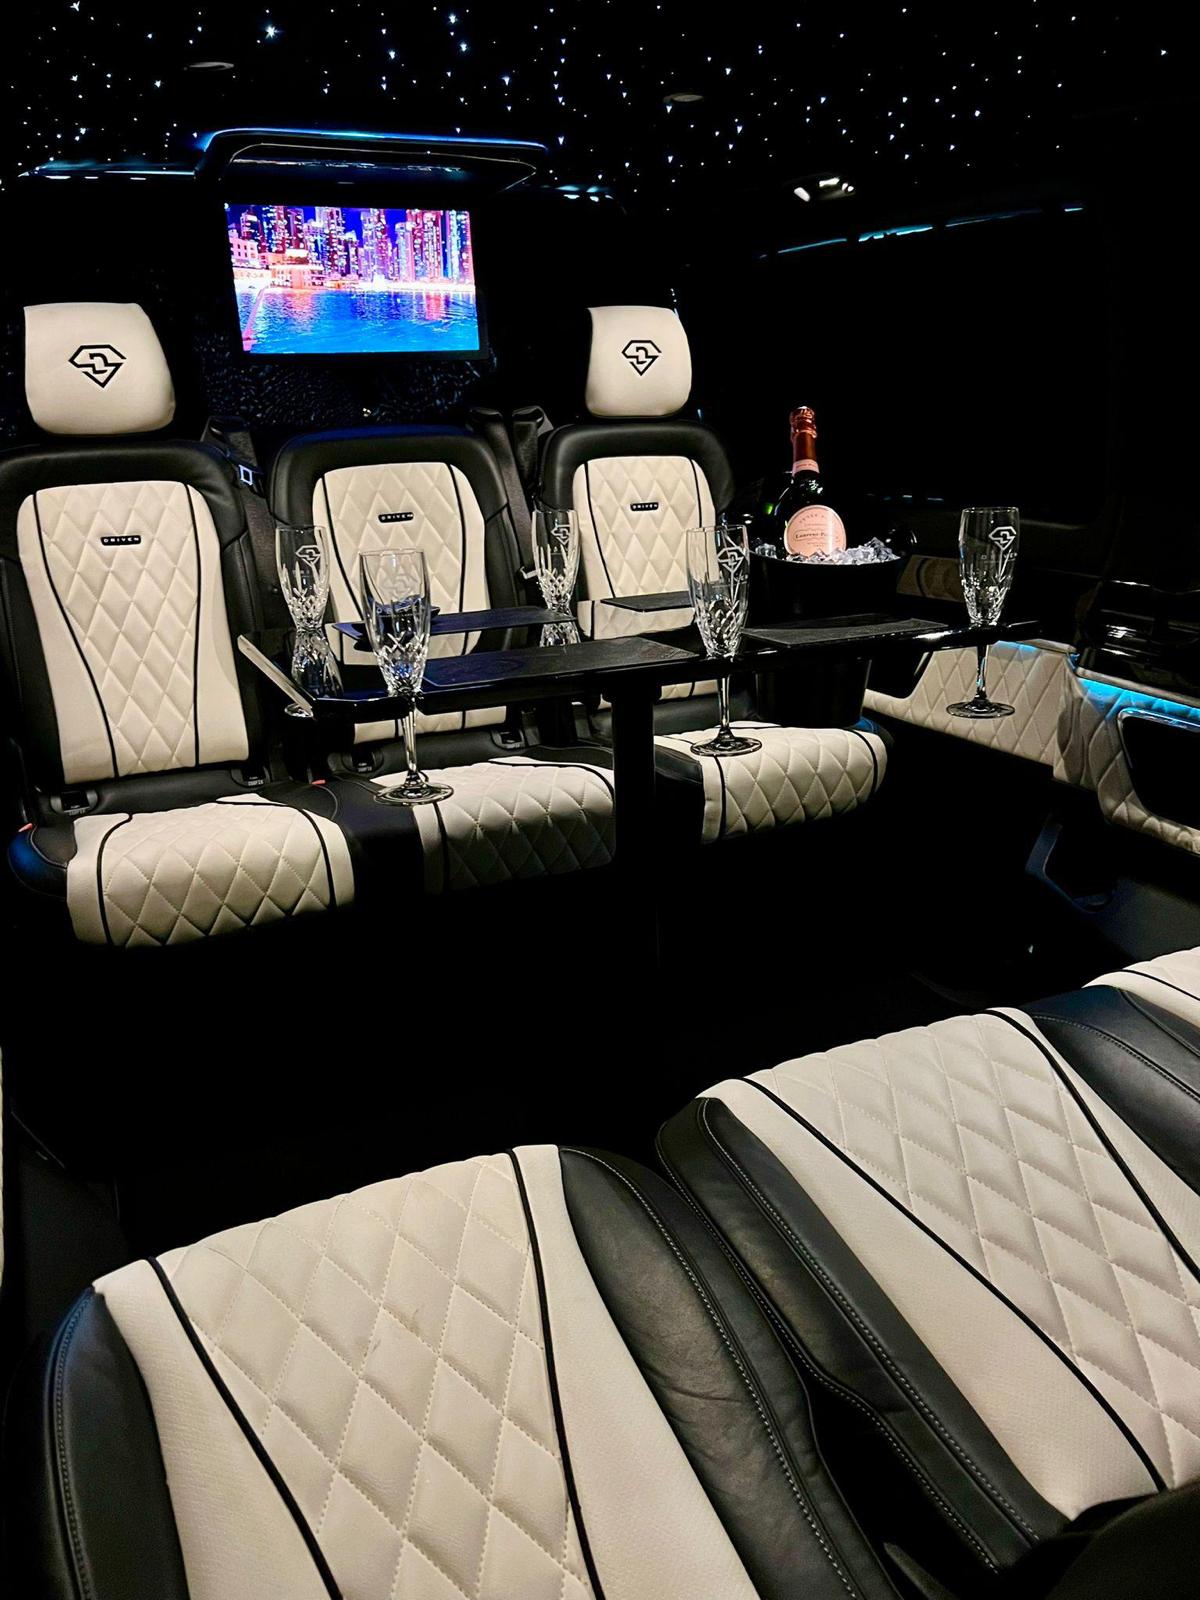 Top Features of the Mercedes V-Class for Luxurious Rides in Boston